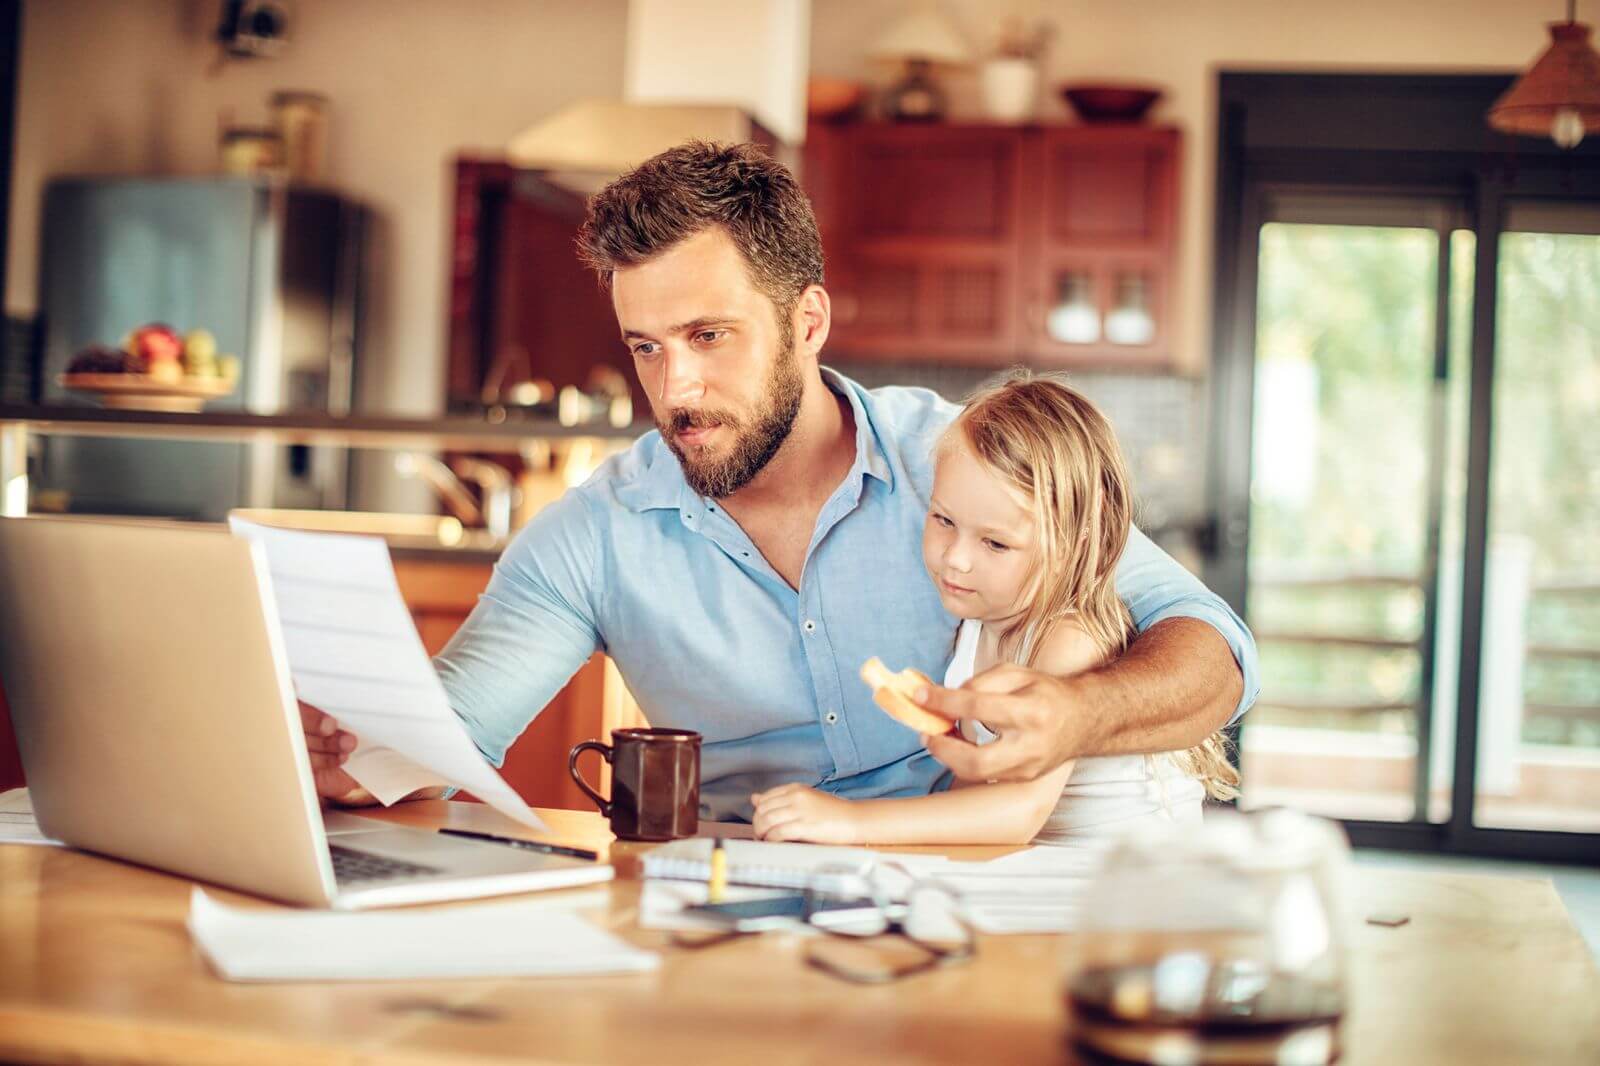 https://www.bestar.com/wp-content/uploads/2020/03/father-working-from-home.jpeg